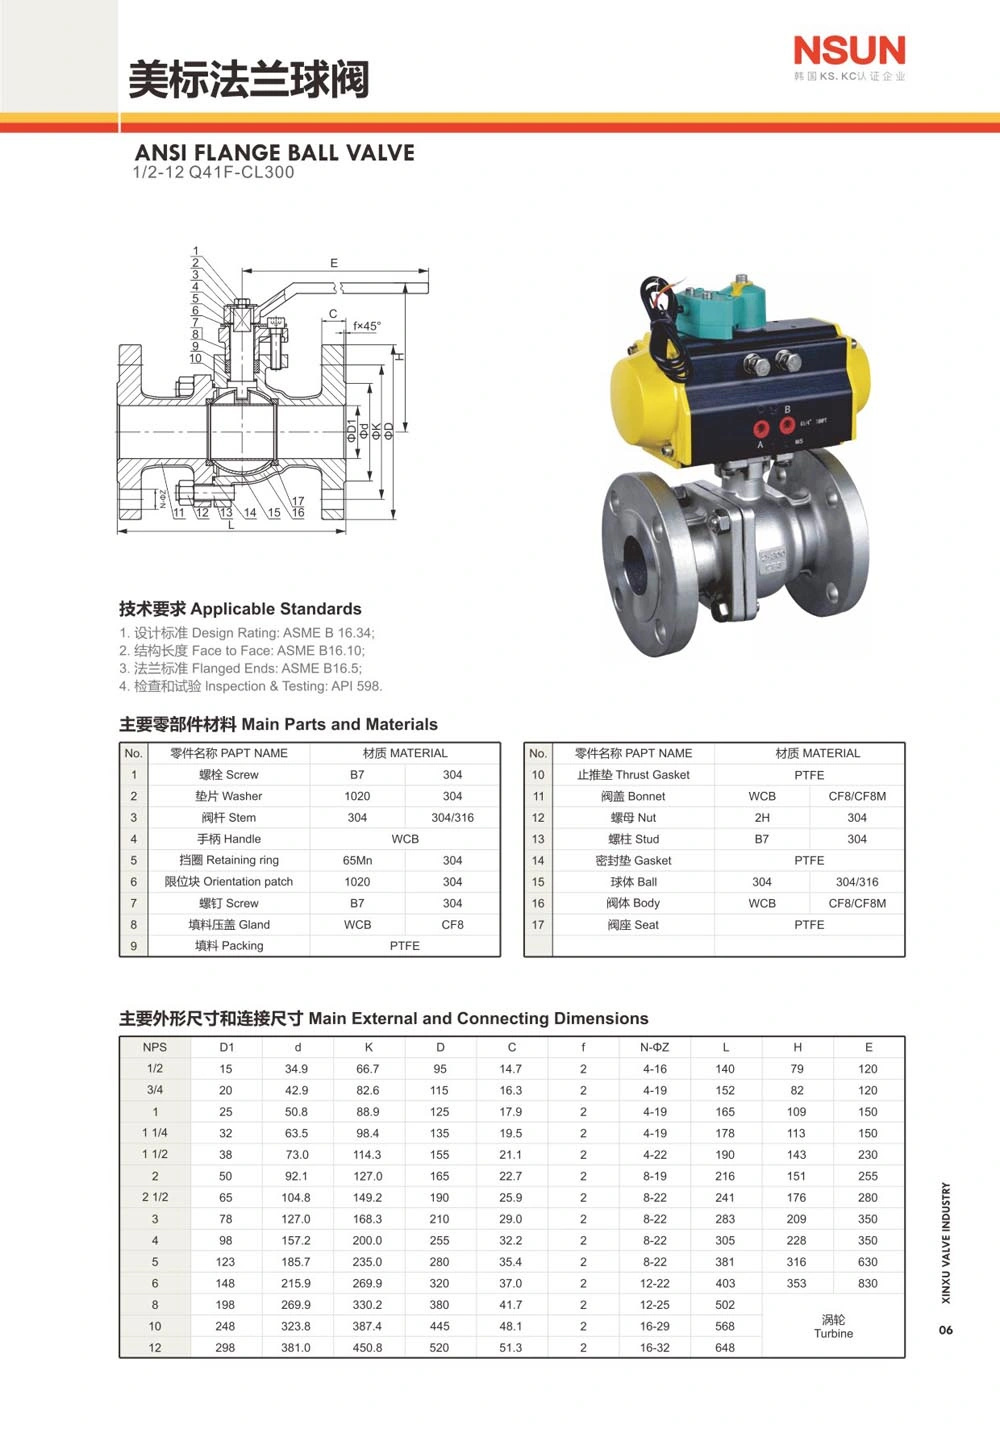 150lb Dn100 Flanged Ball Valve with Fire Safe Design